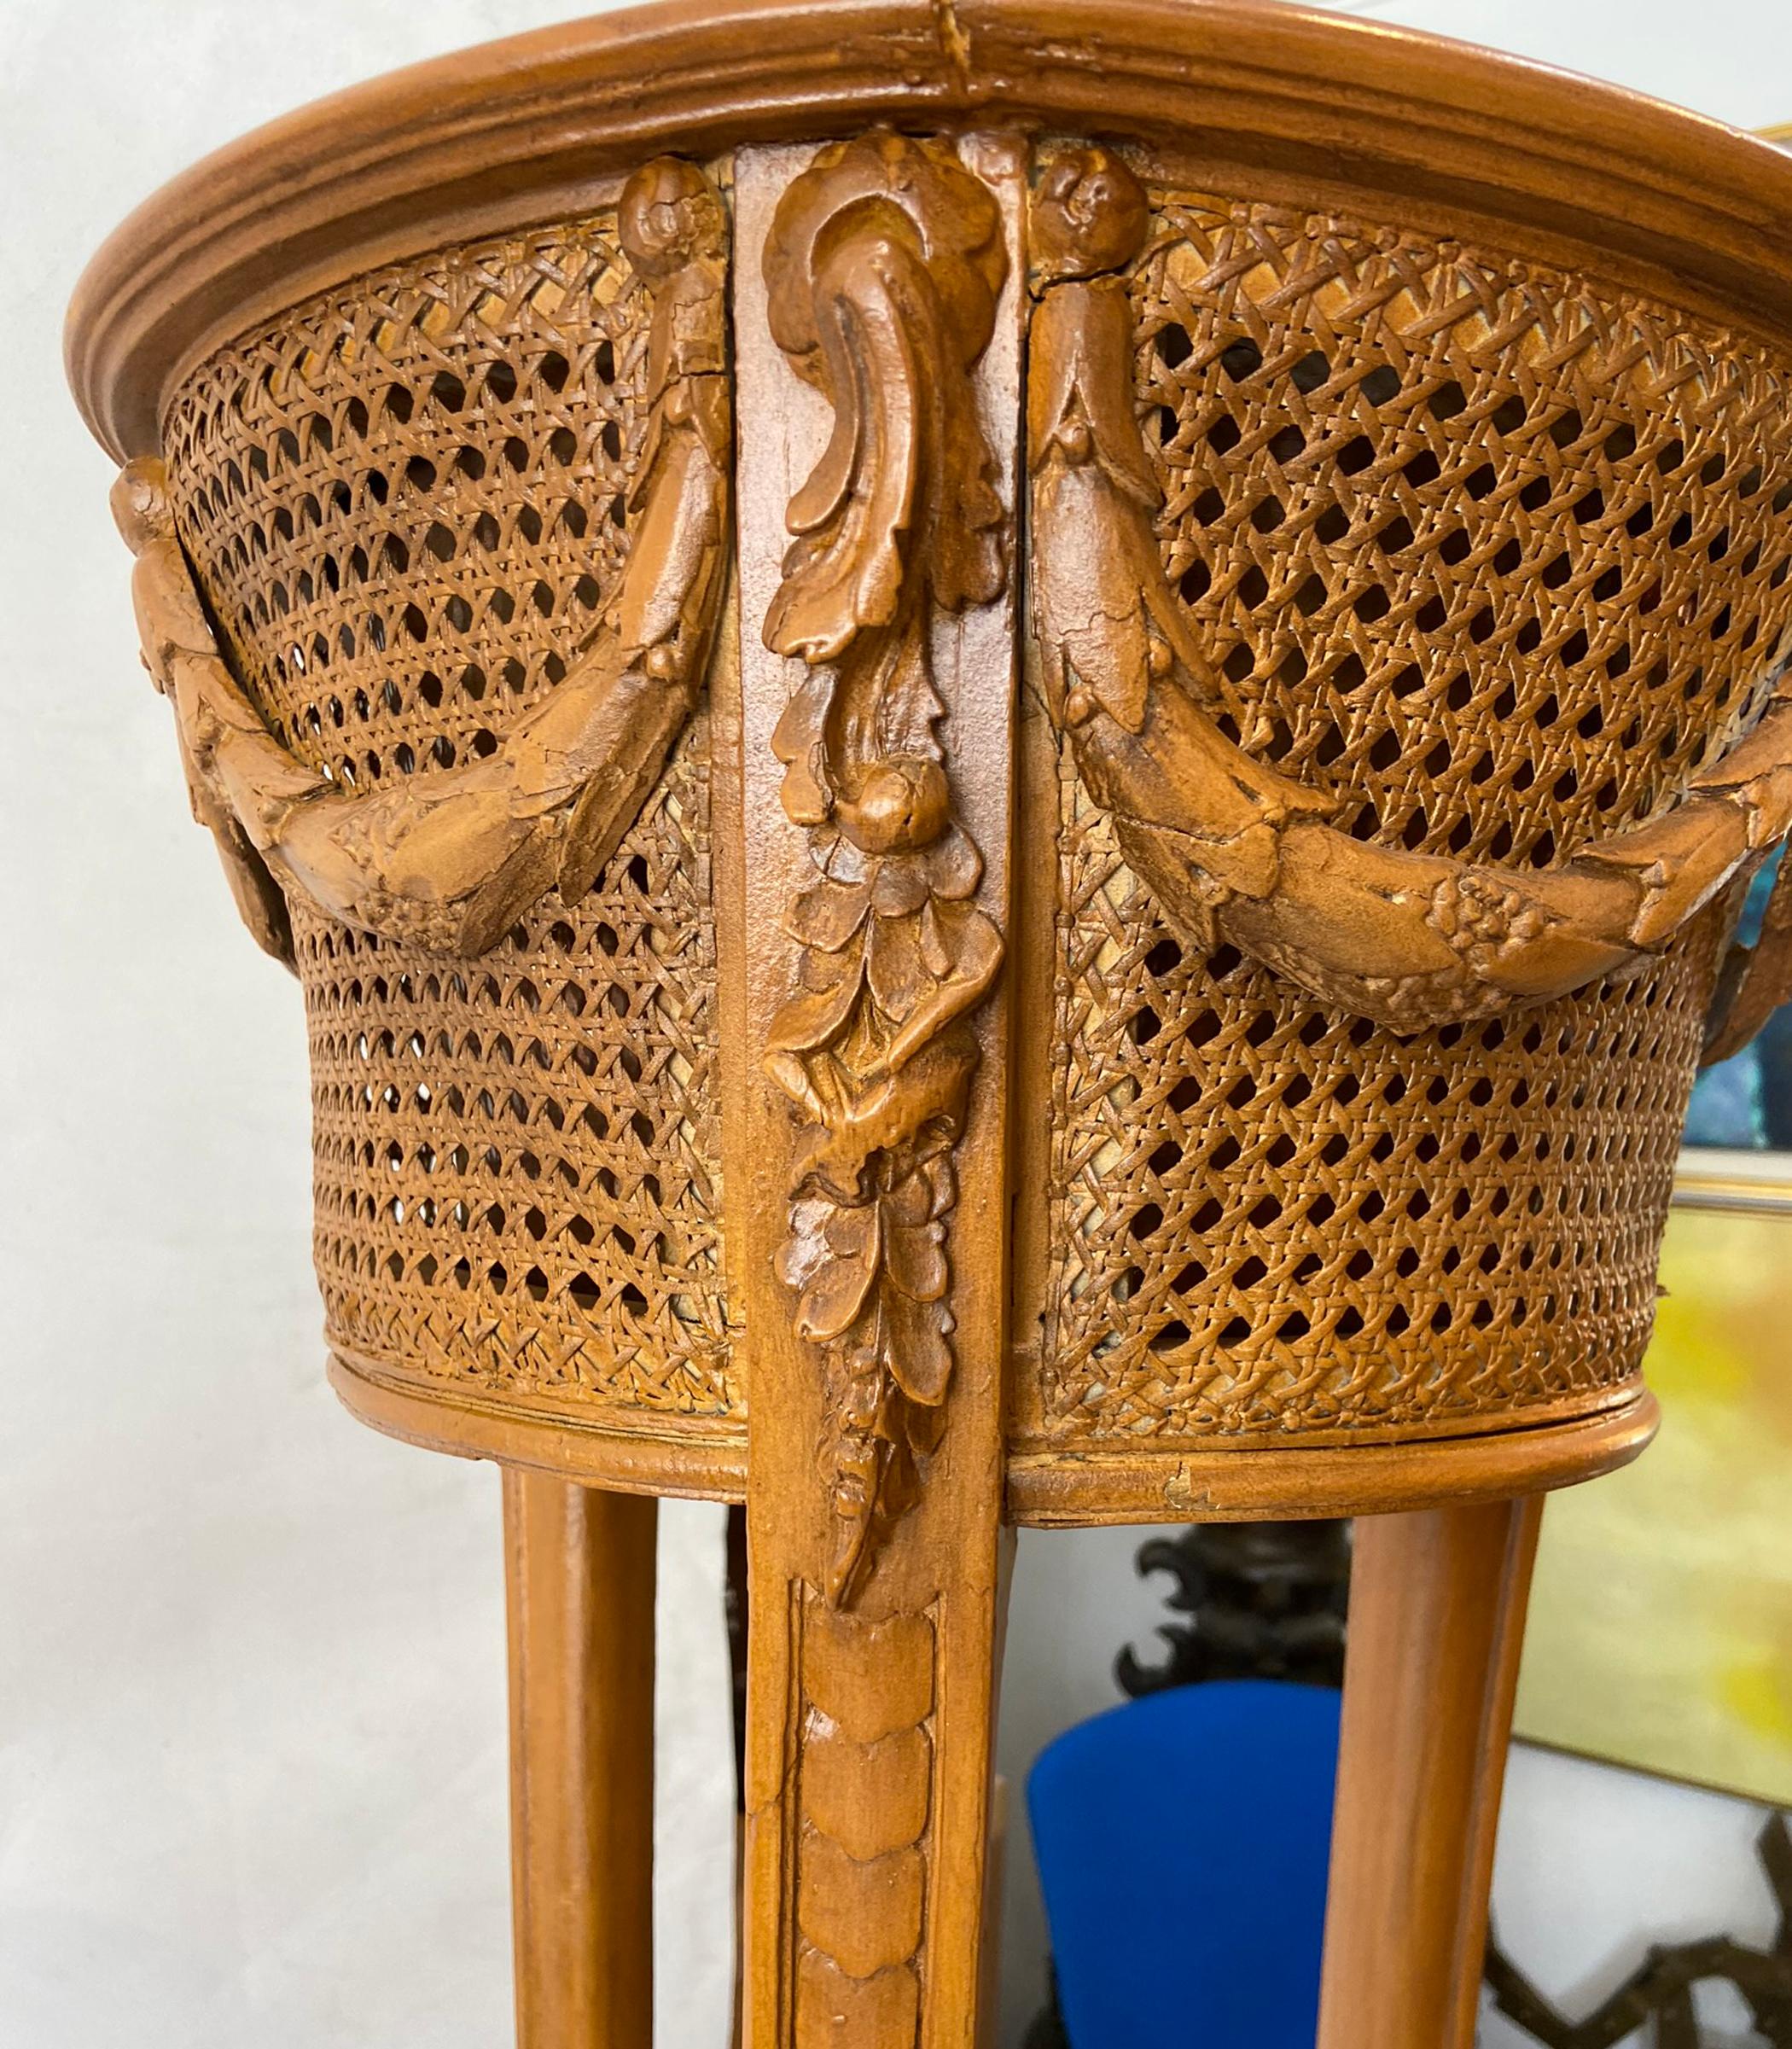 Vintage plant stand. Three carved wood legs supporting metal lined planter. Cane with draped decoration. In very good condition no damage to cane.